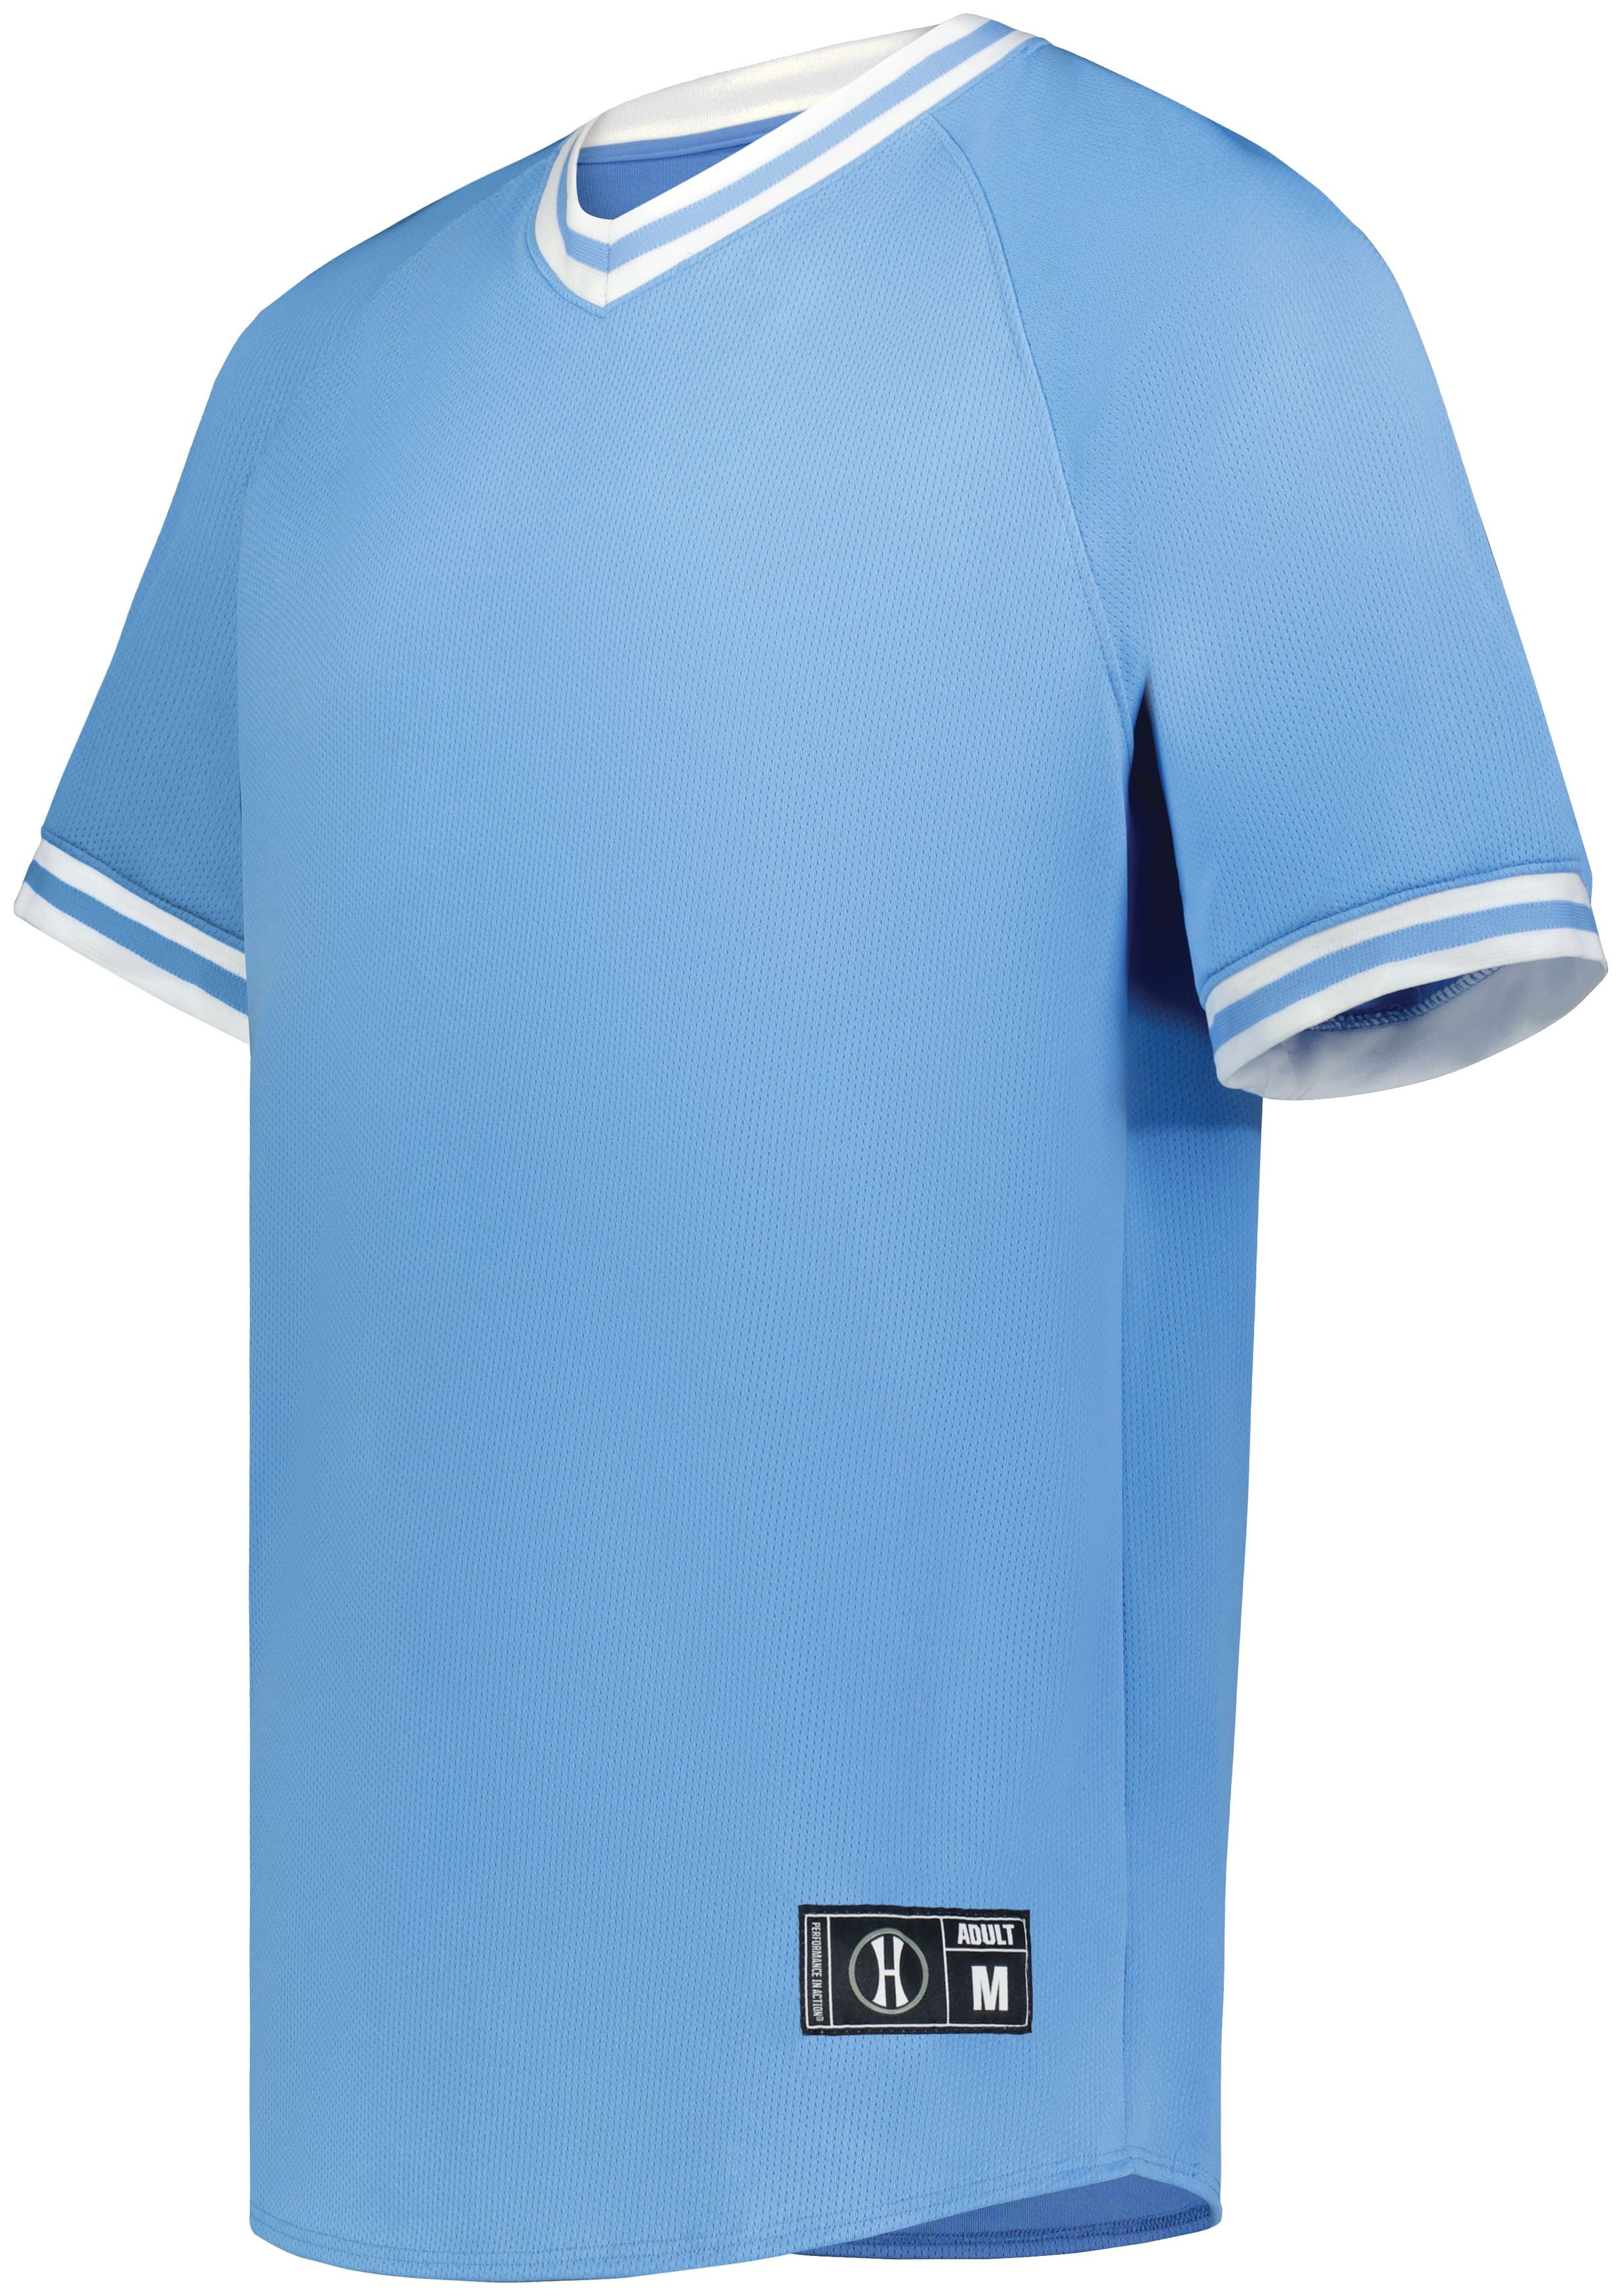 Holloway Game7 Full-Button Baseball Jersey with Dry-Excel 221025